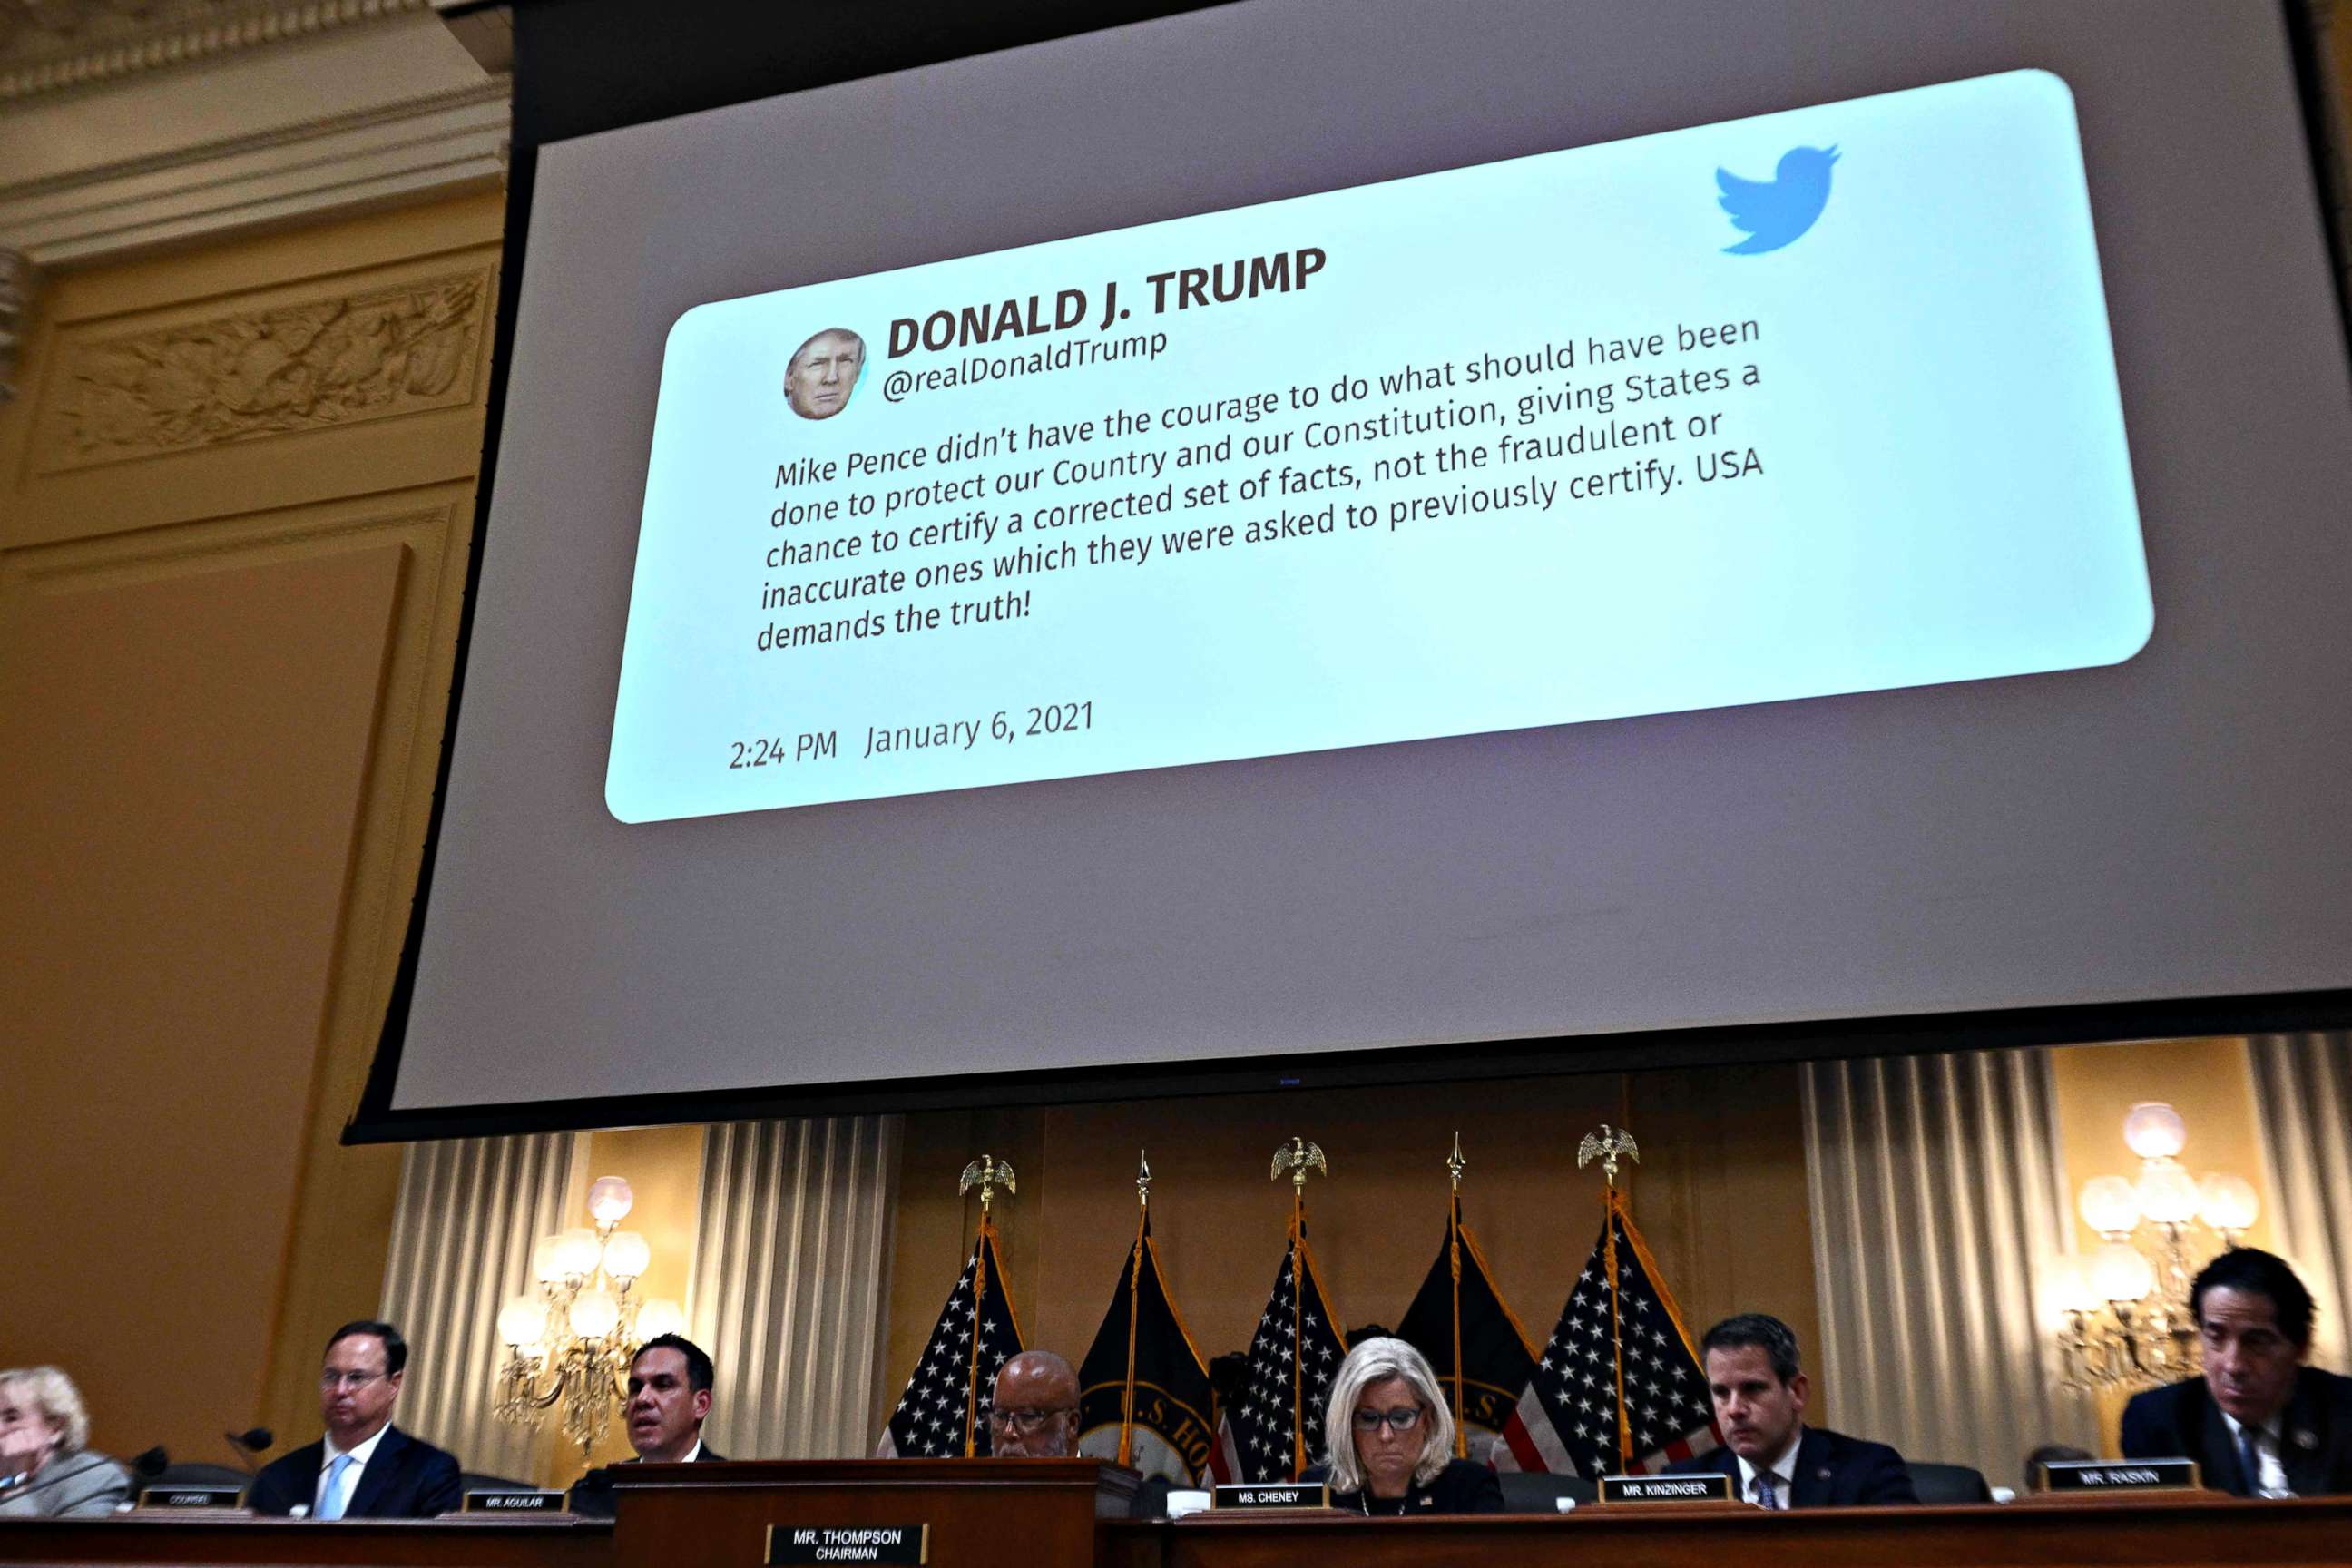 A Jan. 6, 2021 tweet from President Donald Trump regarding Vice President Mike Pence is seen on a screen during a hearing of the US House Select Committee to Investigate the January 6 Attack on the US Capitol, on Capitol Hill in Washington, June 16, 2022.